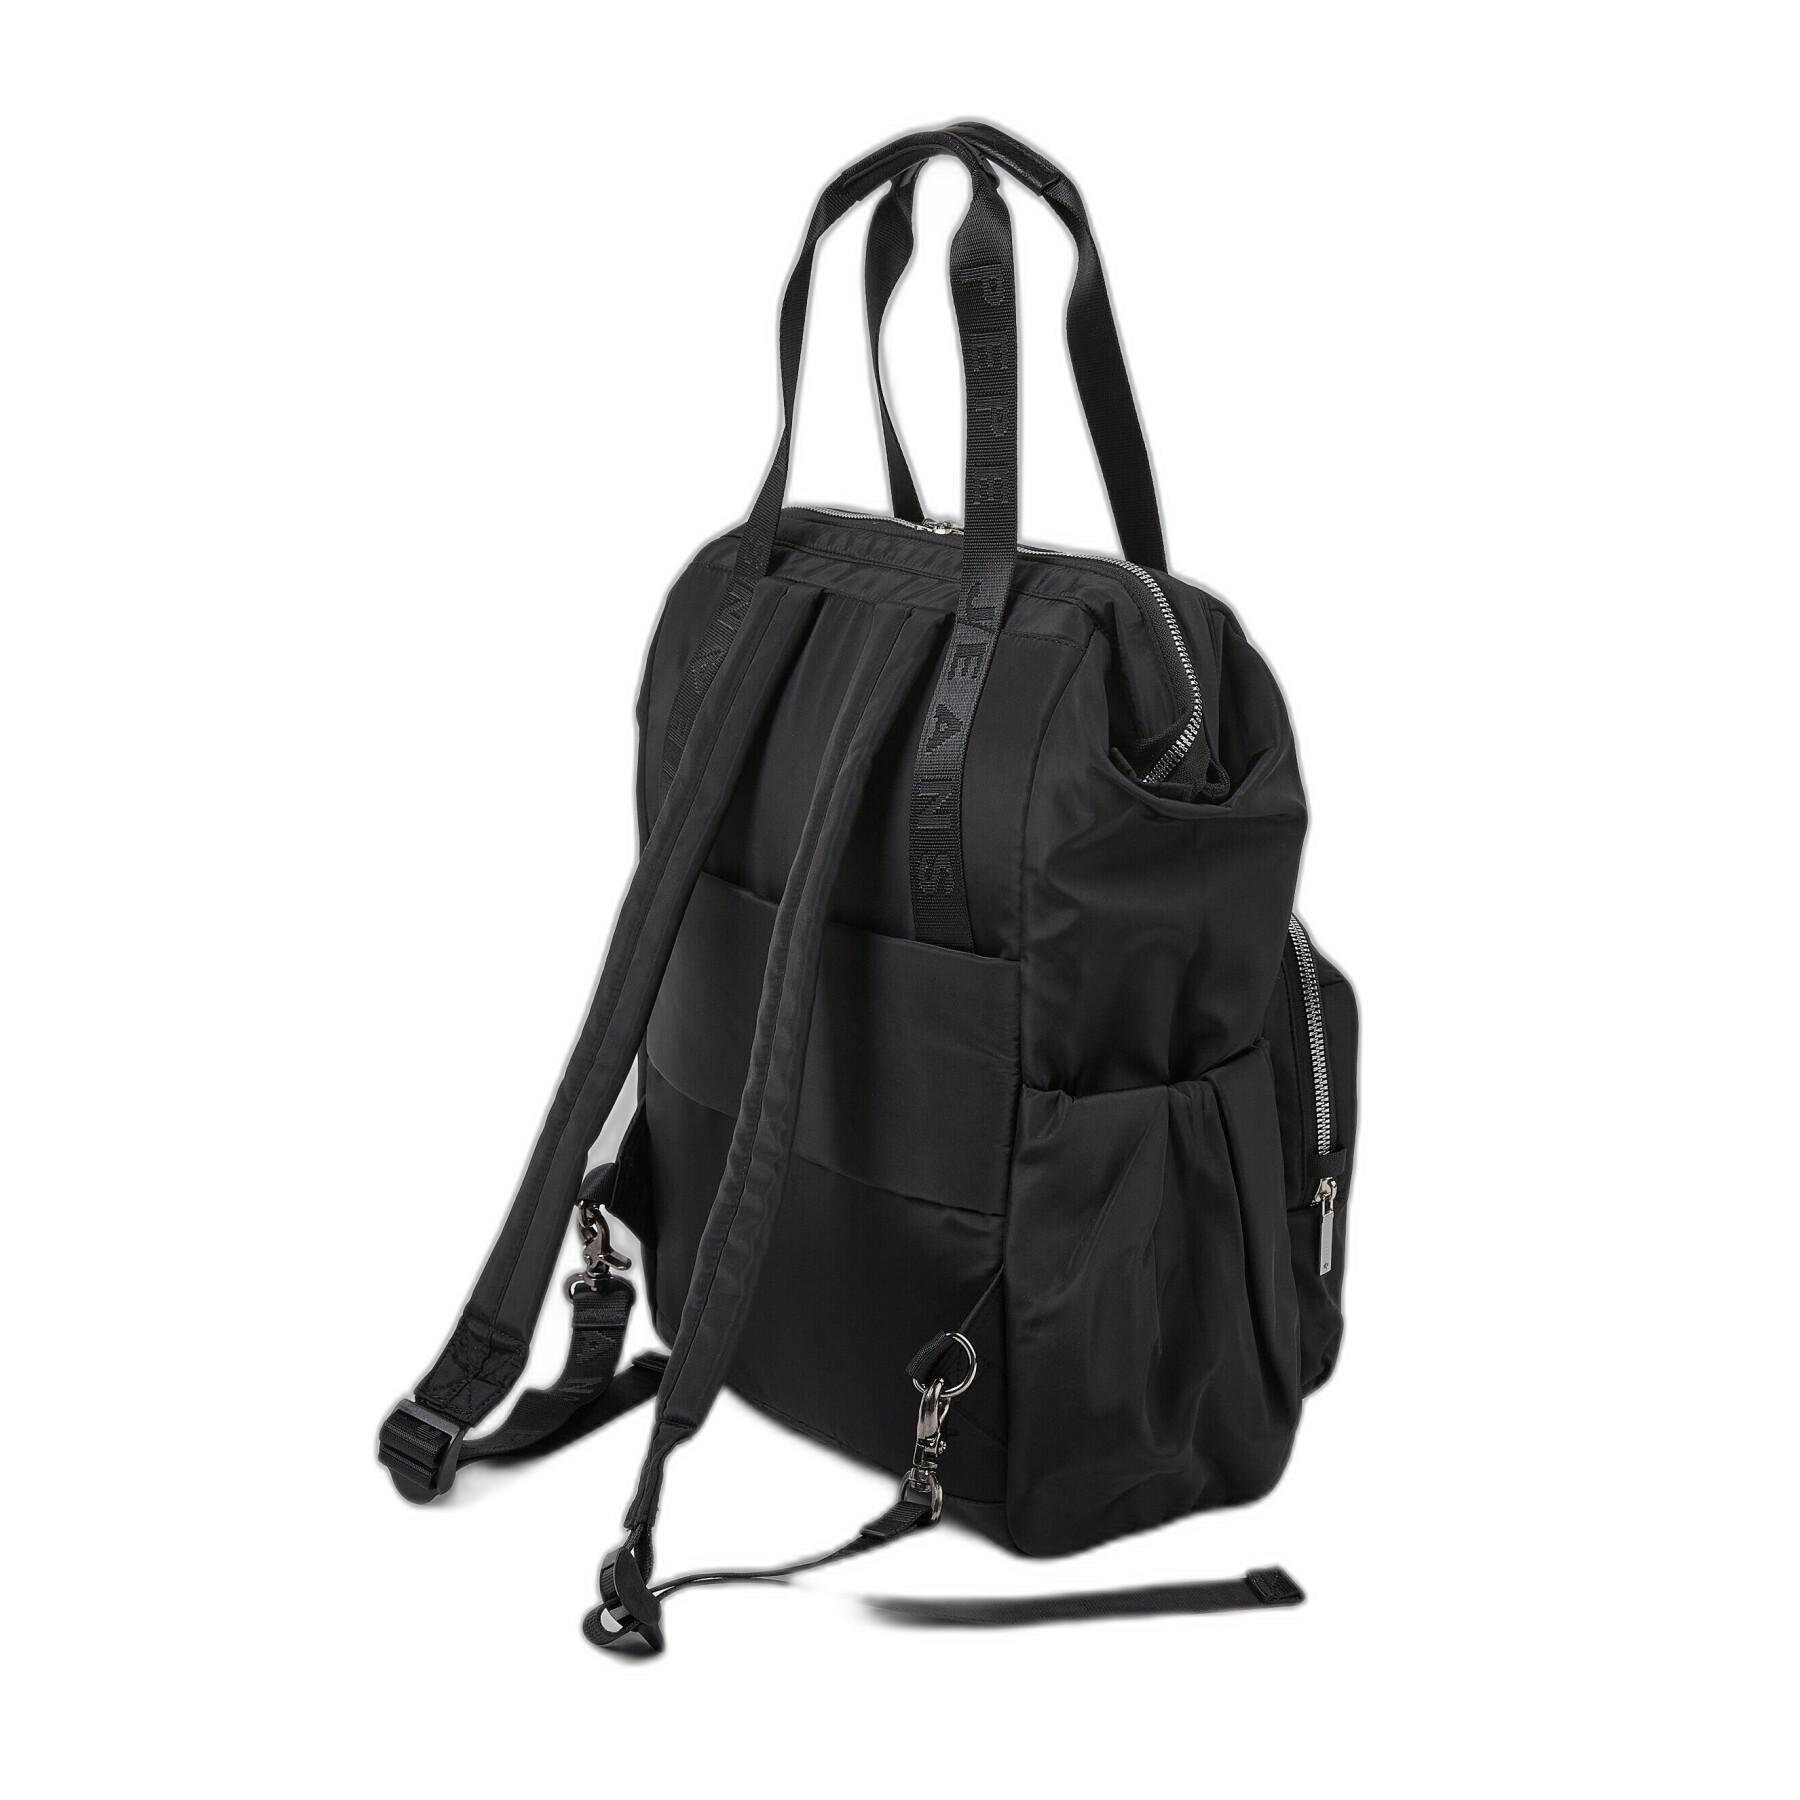 Women's backpack Pepe Jeans Diana